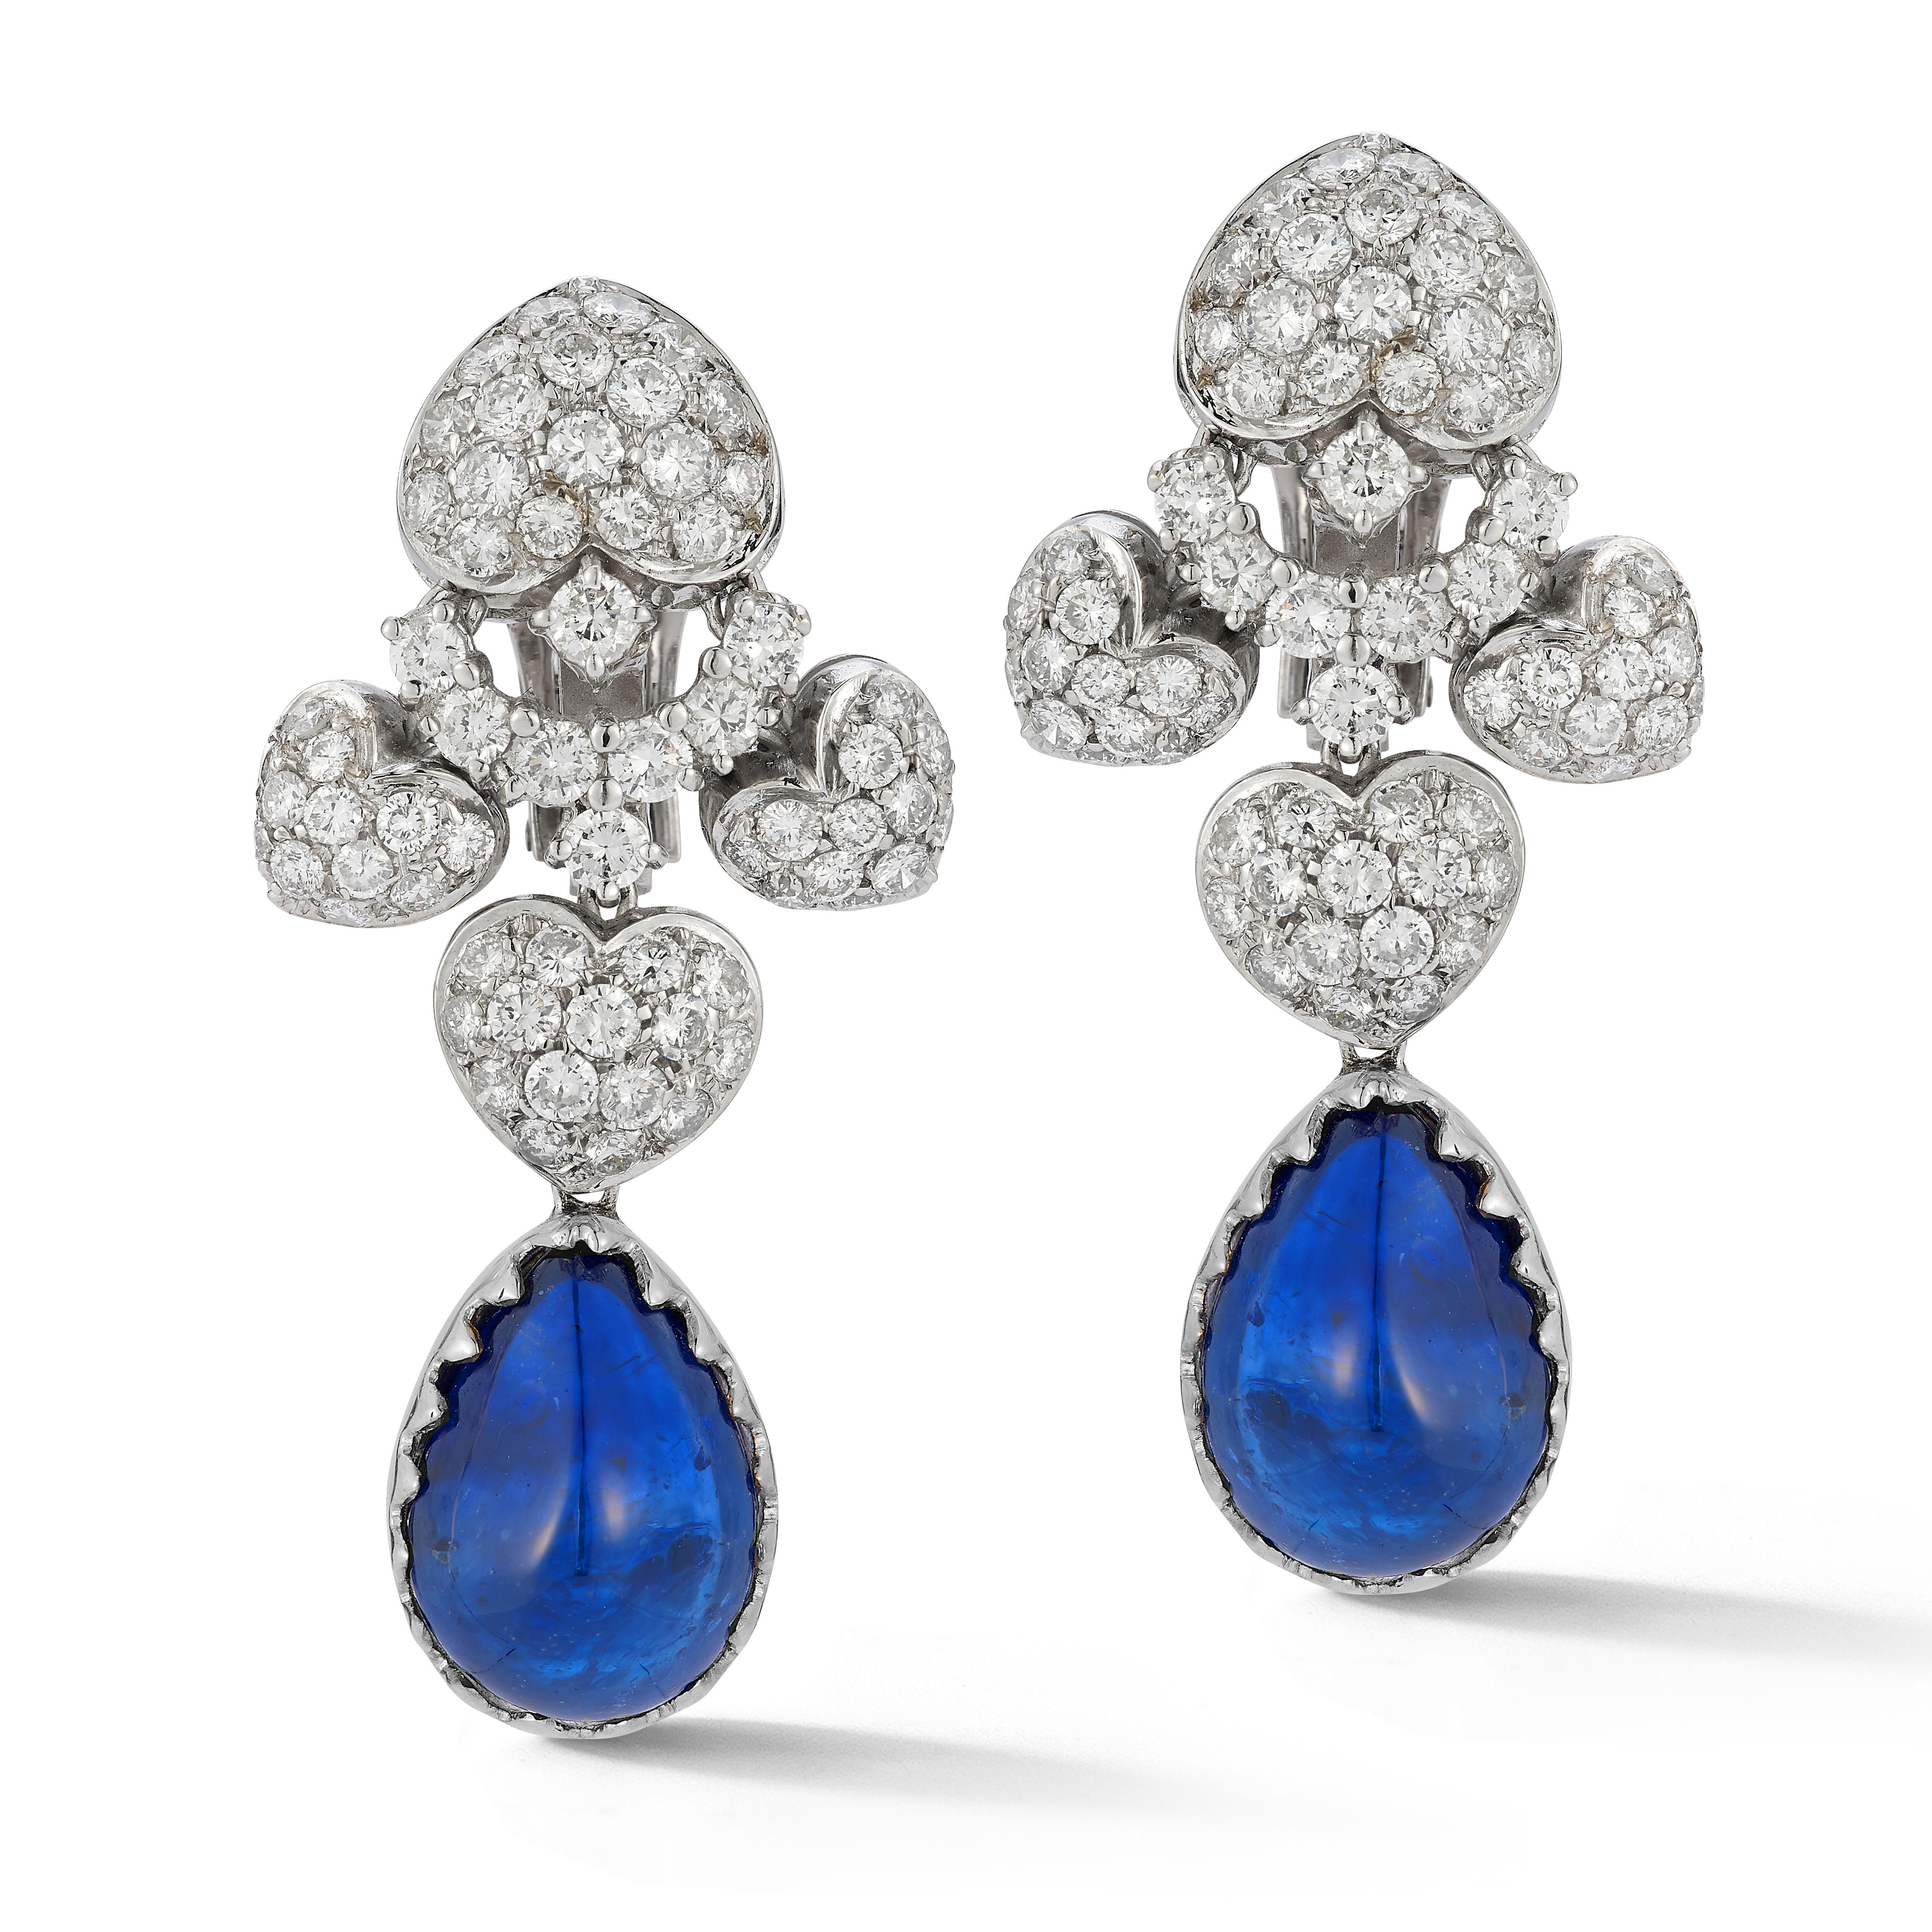 Pear Shape Cabochon Sapphire and Diamond Earrings

A pair of 18 karat white gold earrings set with 130 round cut diamonds and 2 cabochon pear shaped sapphire drops

Accompanied by an AGL report stating that one of the sapphire drops is an unheated